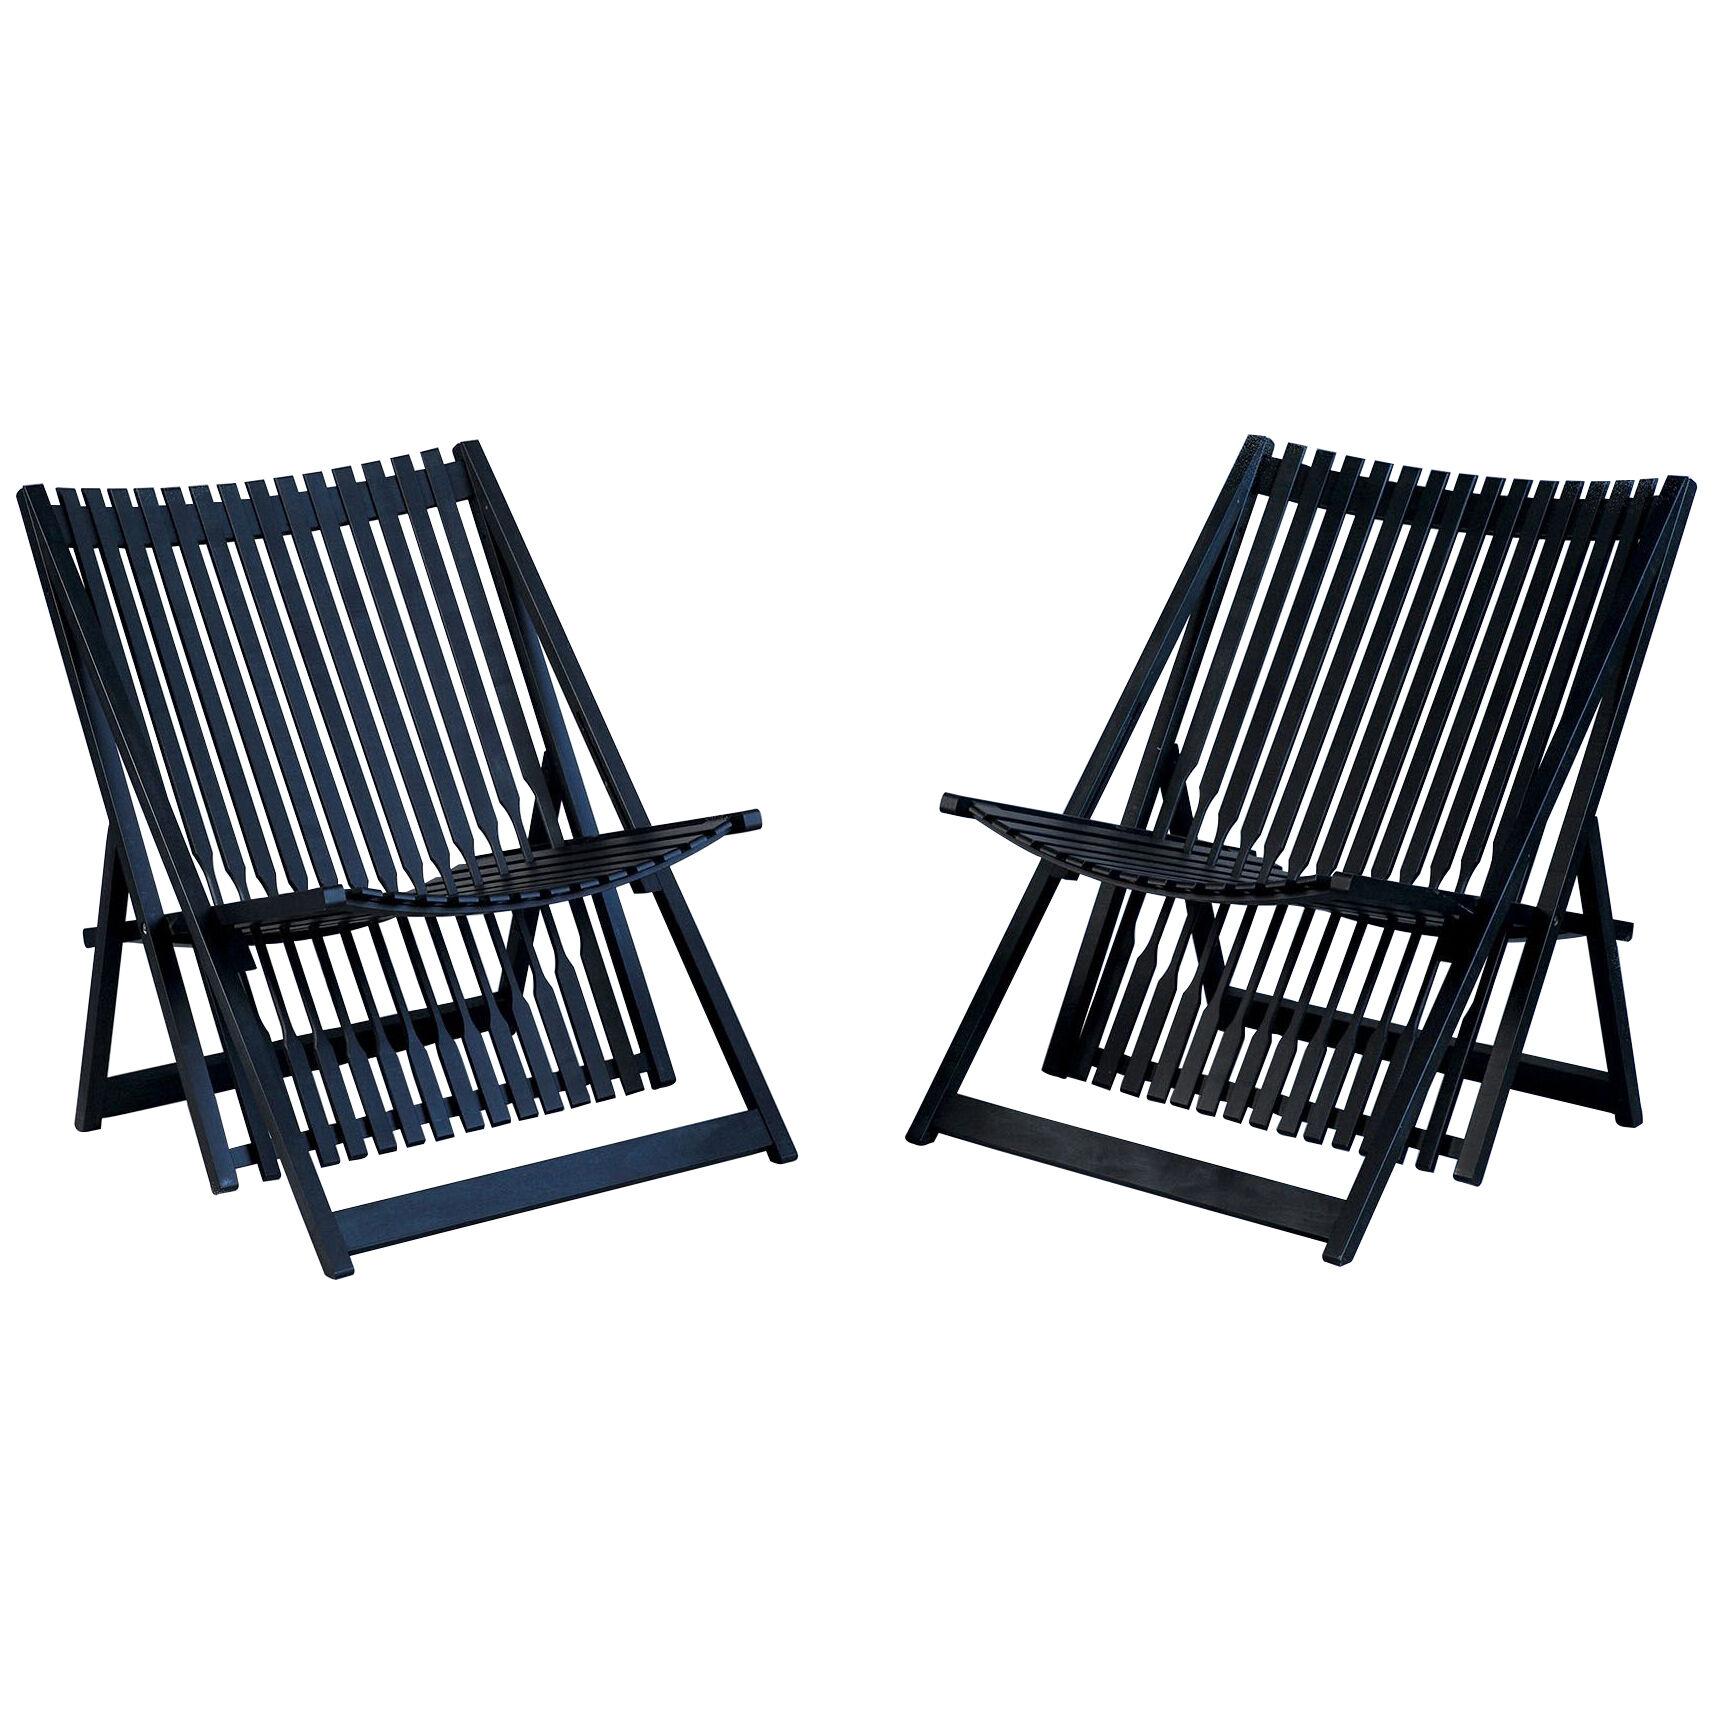 Jean-Claude Duboys, Pair of A1 Armchairs, France, 1980